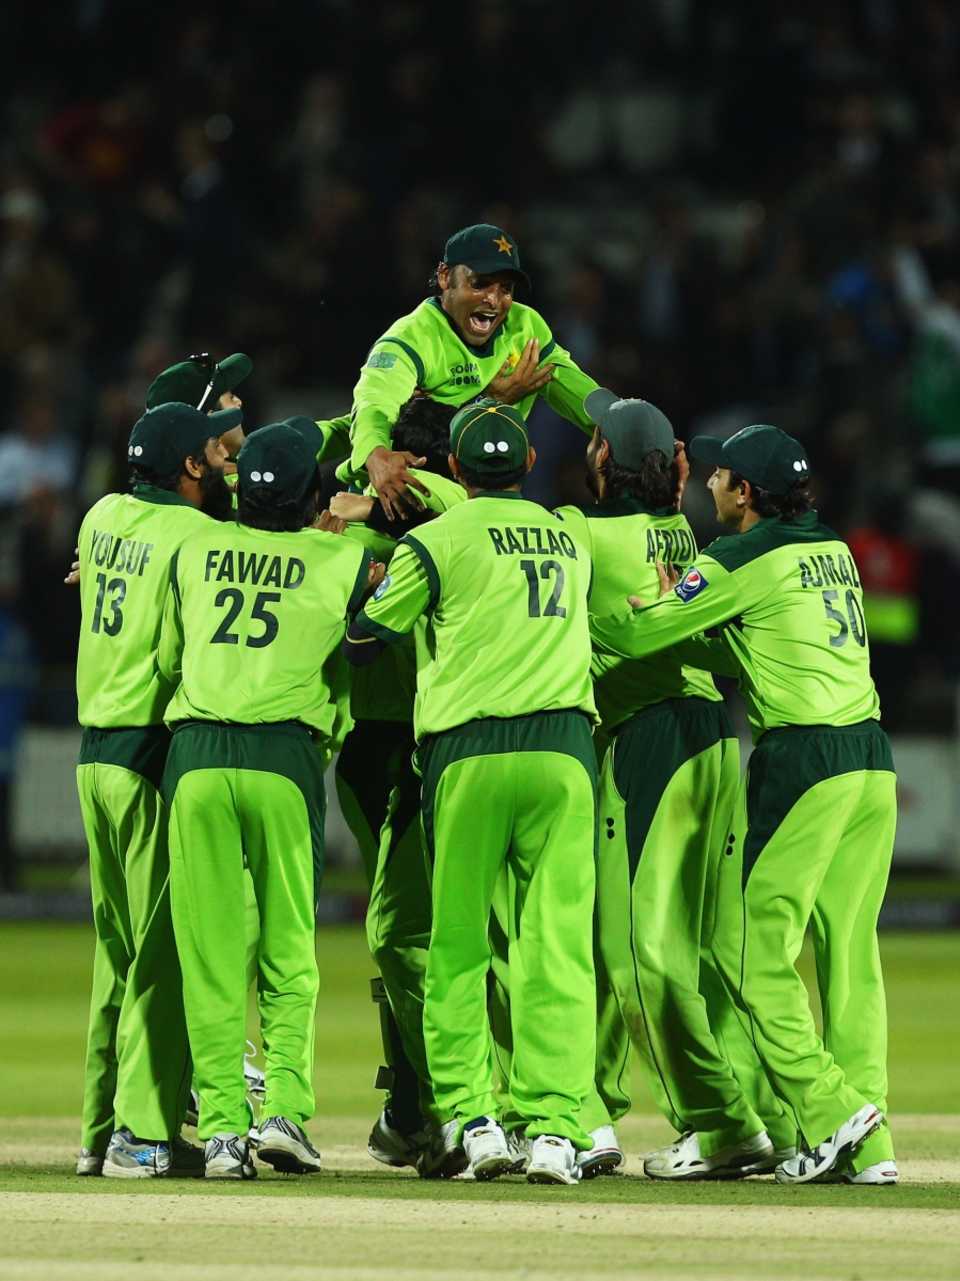 Pakistan were obviously over-joyed at the win, and even a 35-year-old Shoaib Akhtar was leaping around in celebration, England v Pakistan, 4th ODI, Lord's, September 20, 2010